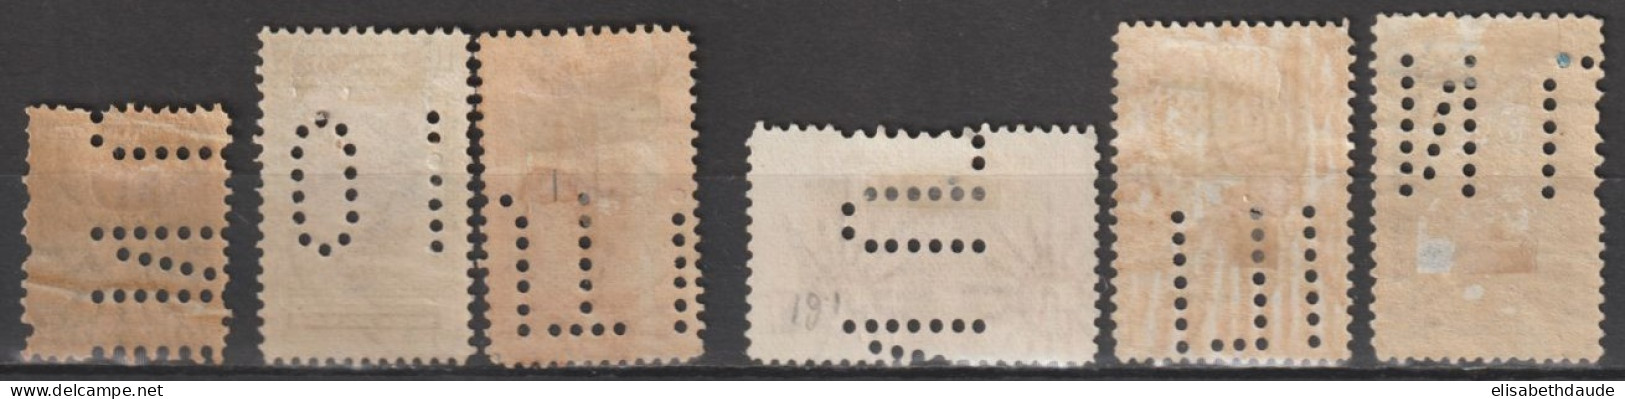 ARGENTINA - 1892/1910 - PERFORE / PERFIN POUR JOURNAUX - YVERT N°109+129/130+161/163  * MH (RARES SANS PERFORATION !) - Unused Stamps